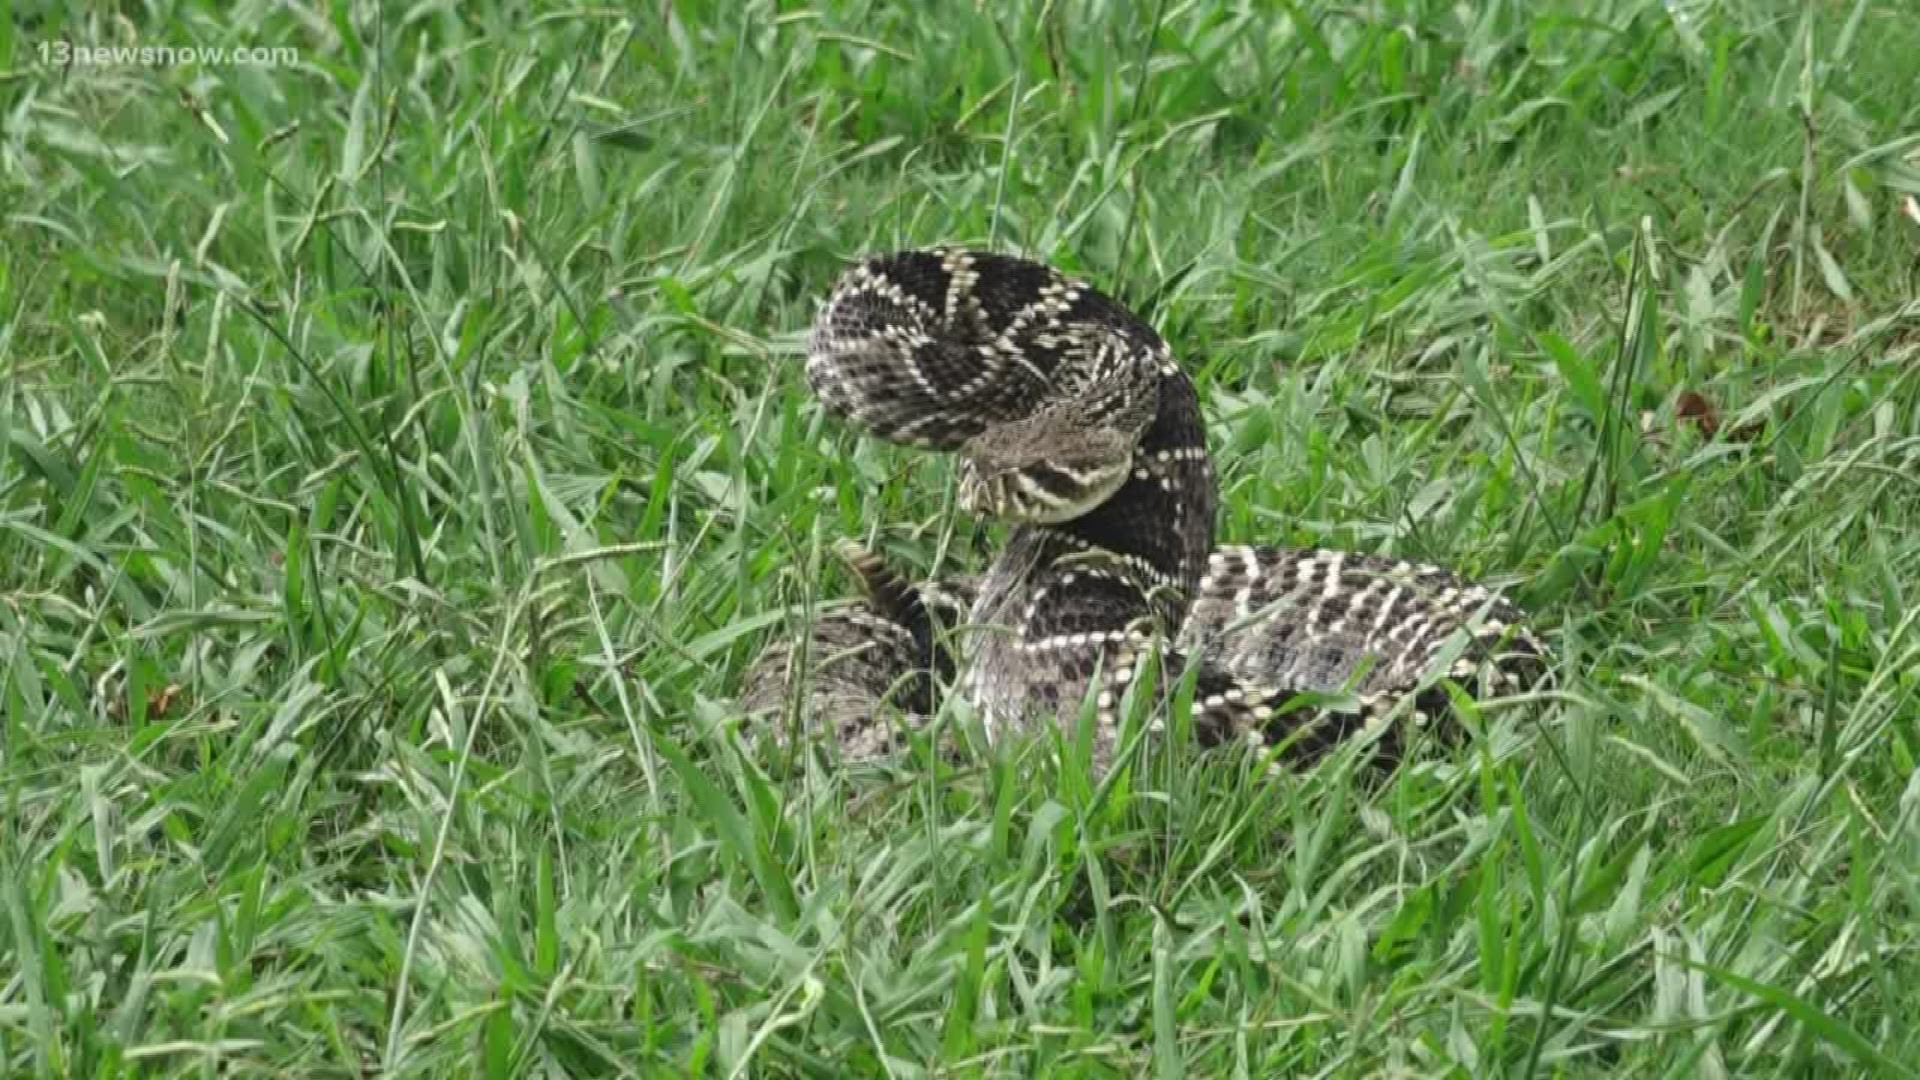 Experts said you shouldn't kill the snake, but rather call animal control to pick it up. To protect your yard, homeowners should keep the grass mowed, short, not to leave debris piles in your yard and cover up holes on your house.